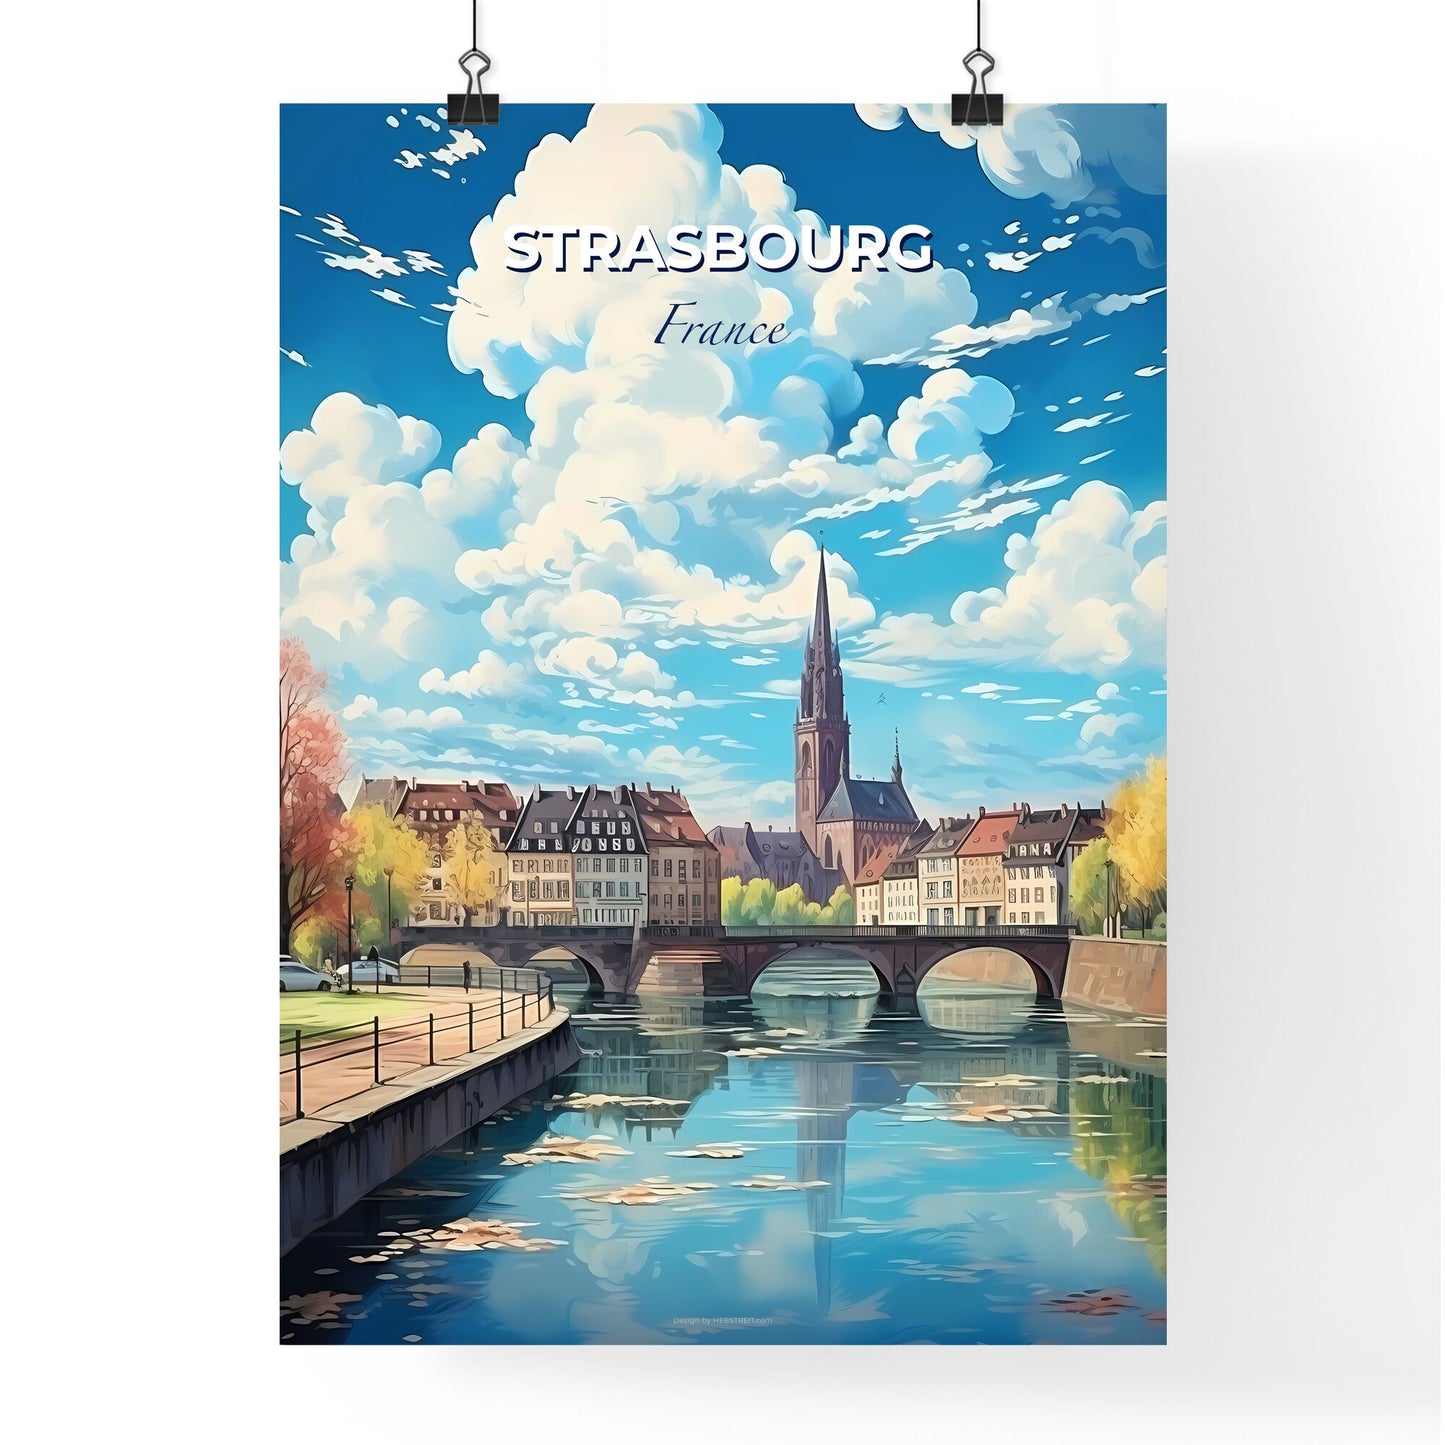 Strasbourg France Skyline - A River With A Bridge And Buildings In The Background - Customizable Travel Gift Default Title